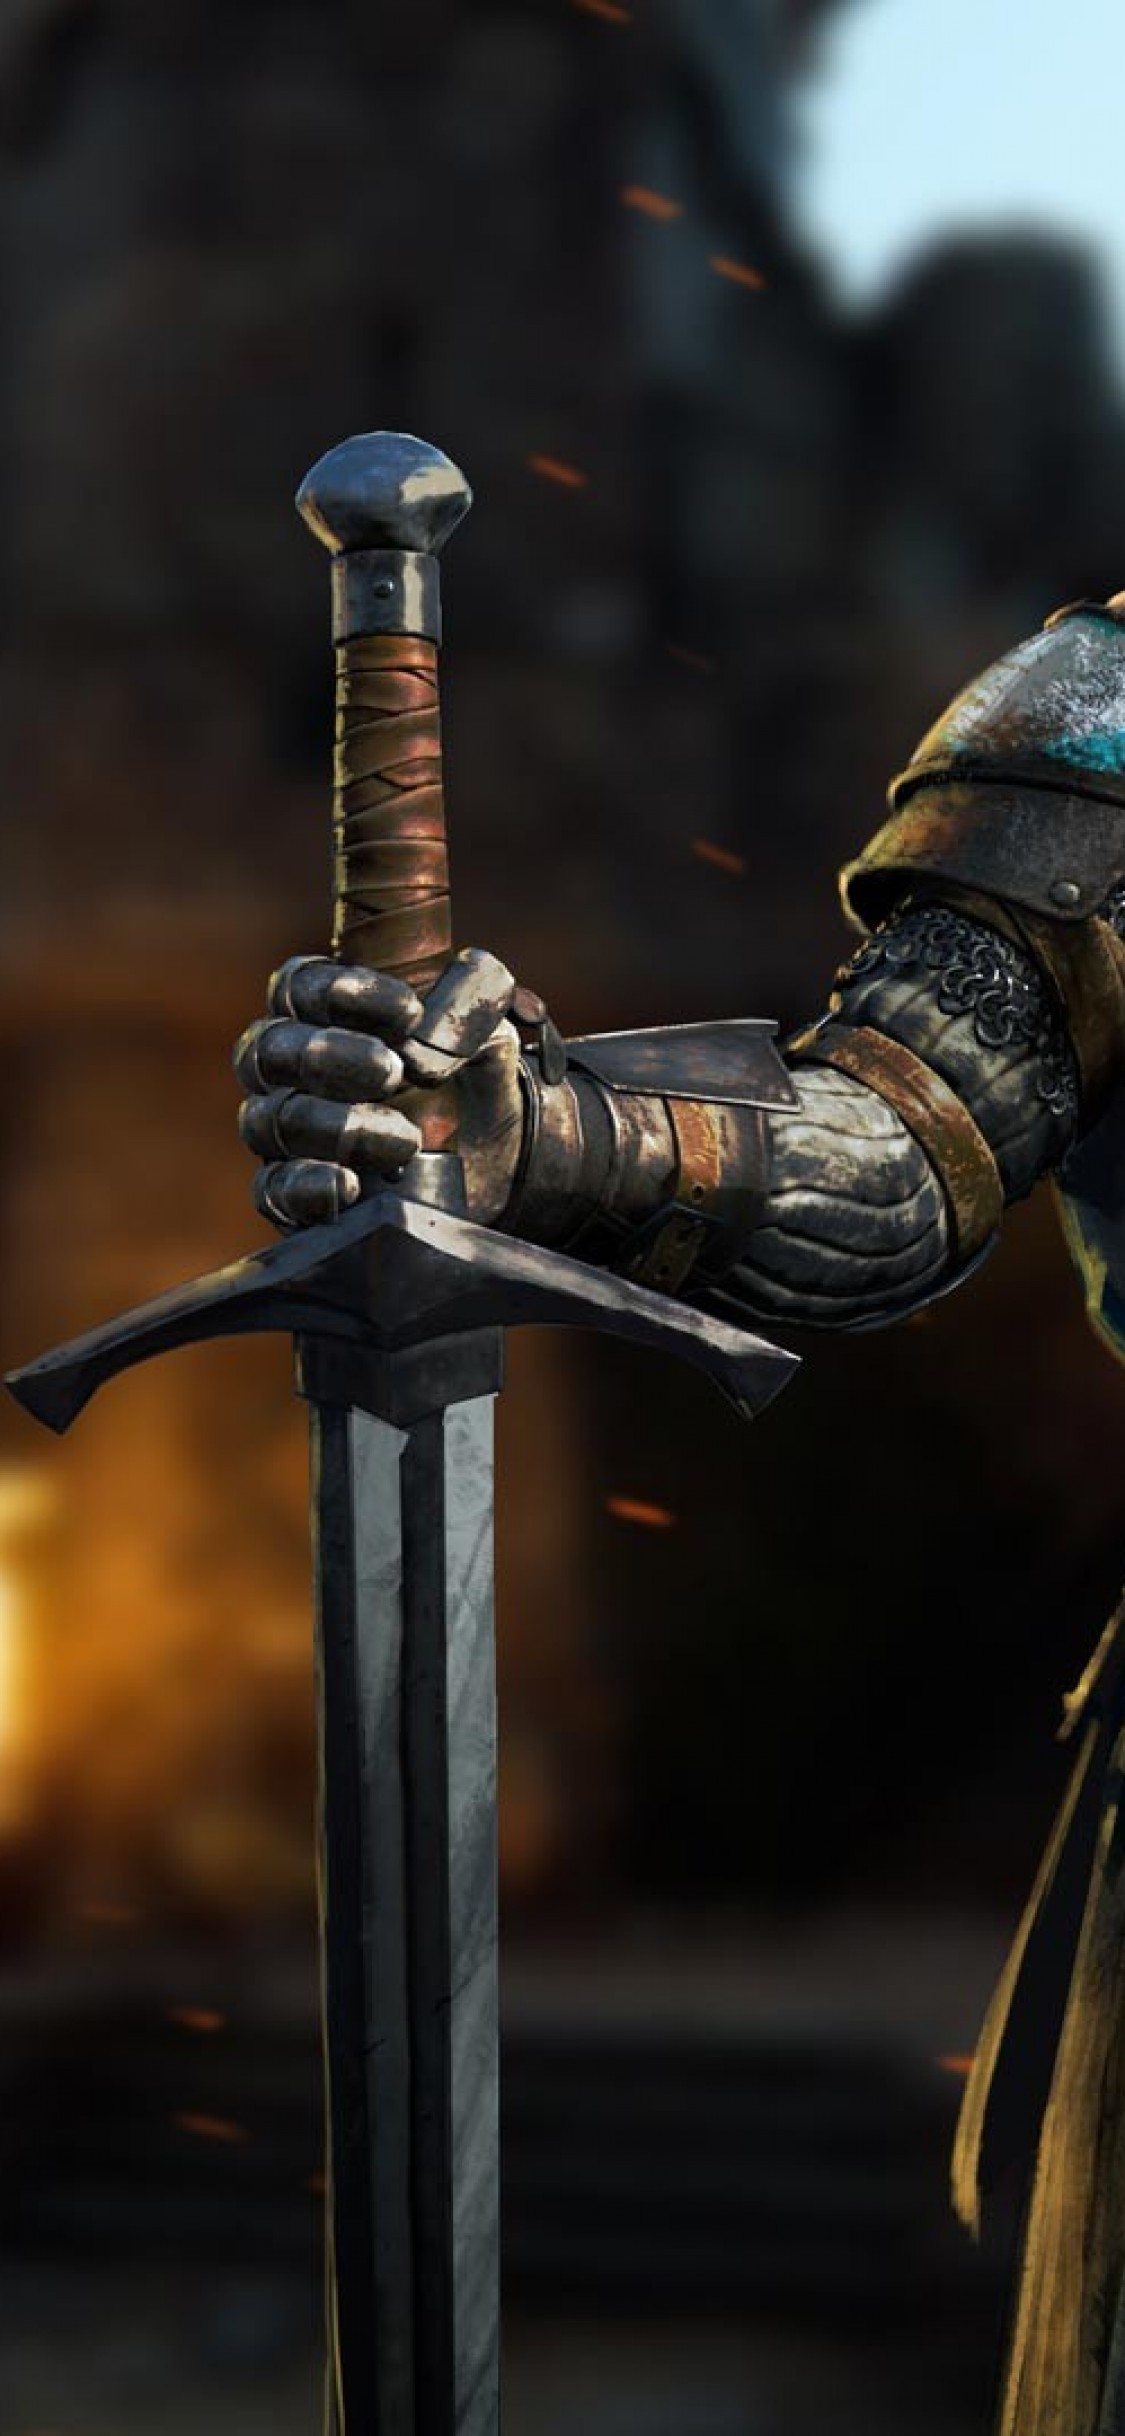 Iphone X For Honor Wallpaper - Warden For Honor , HD Wallpaper & Backgrounds